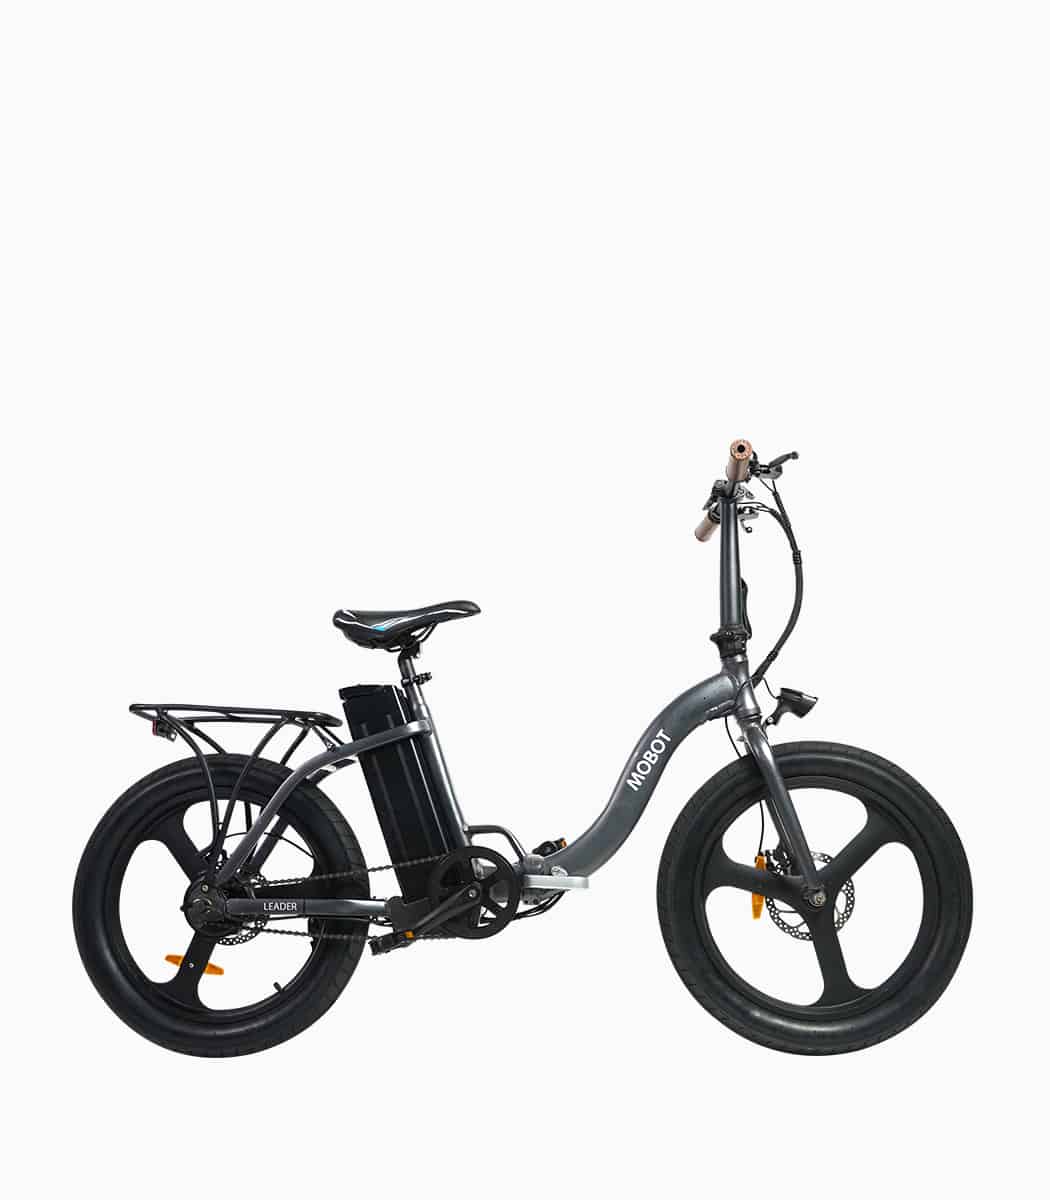 MOBOT LEADER (GREY14AH) LTA approved electric bicycle right